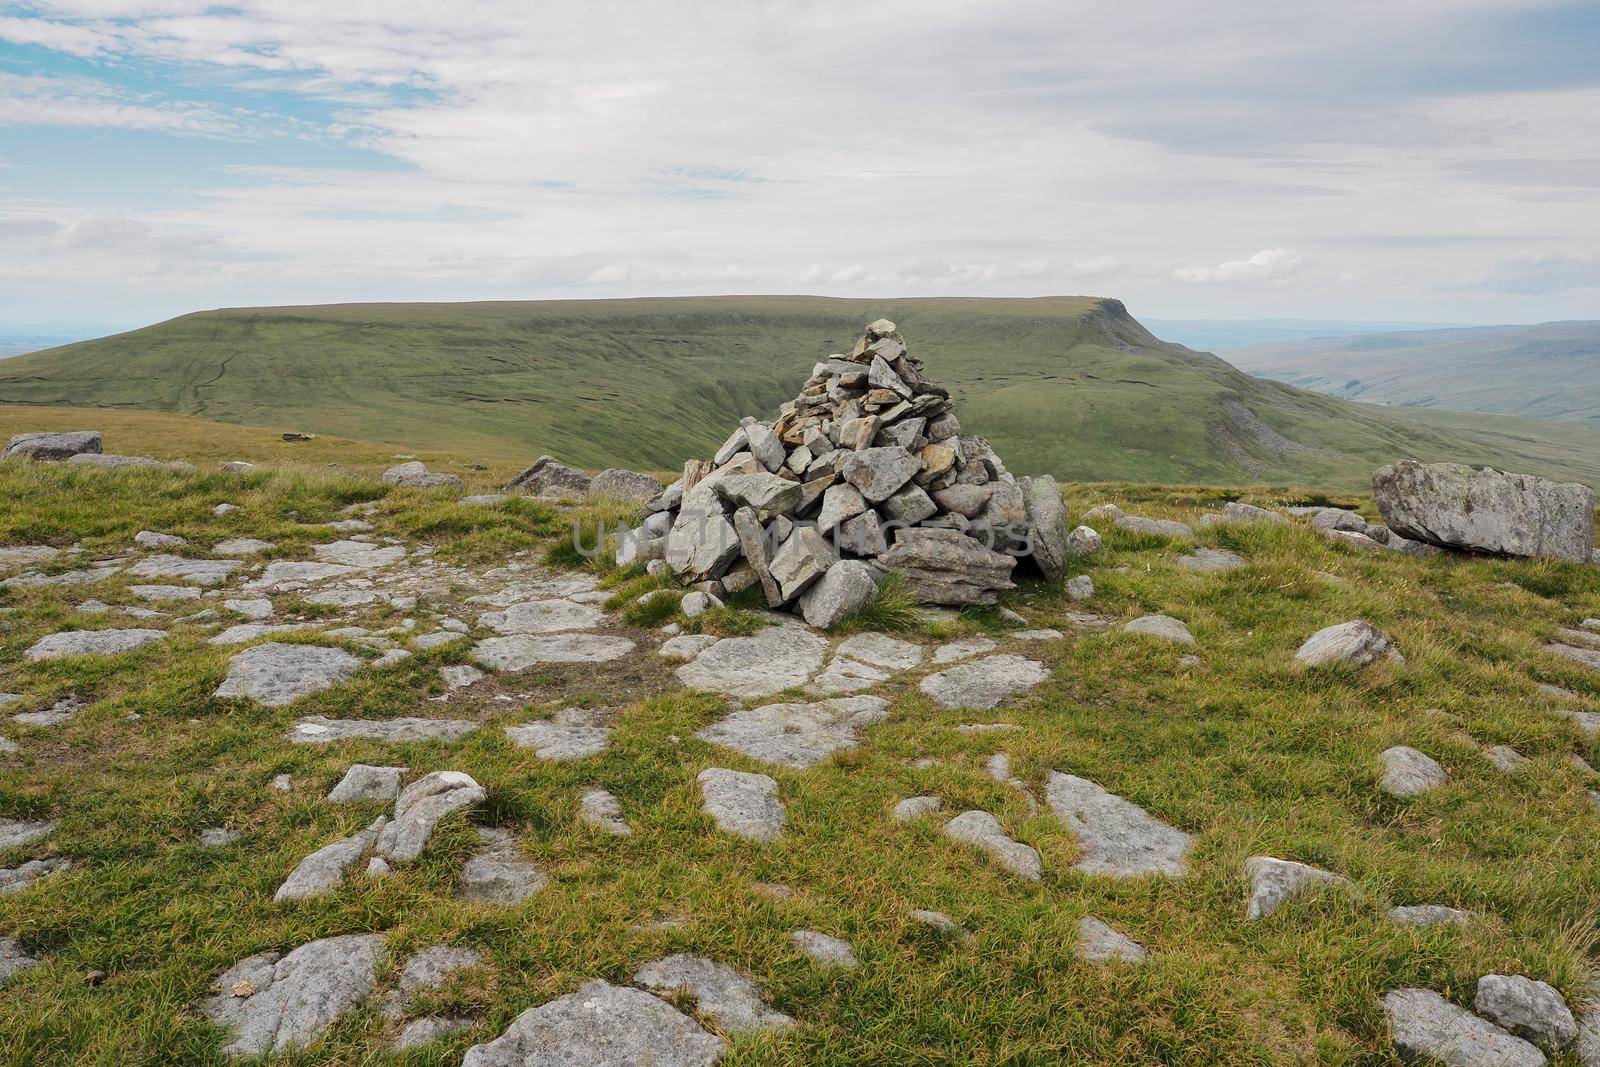 View from the summit of Swarth Fell over to Wild Boar Fell and the cairns on High White Scar, Eden Valley, Cumbria, UK